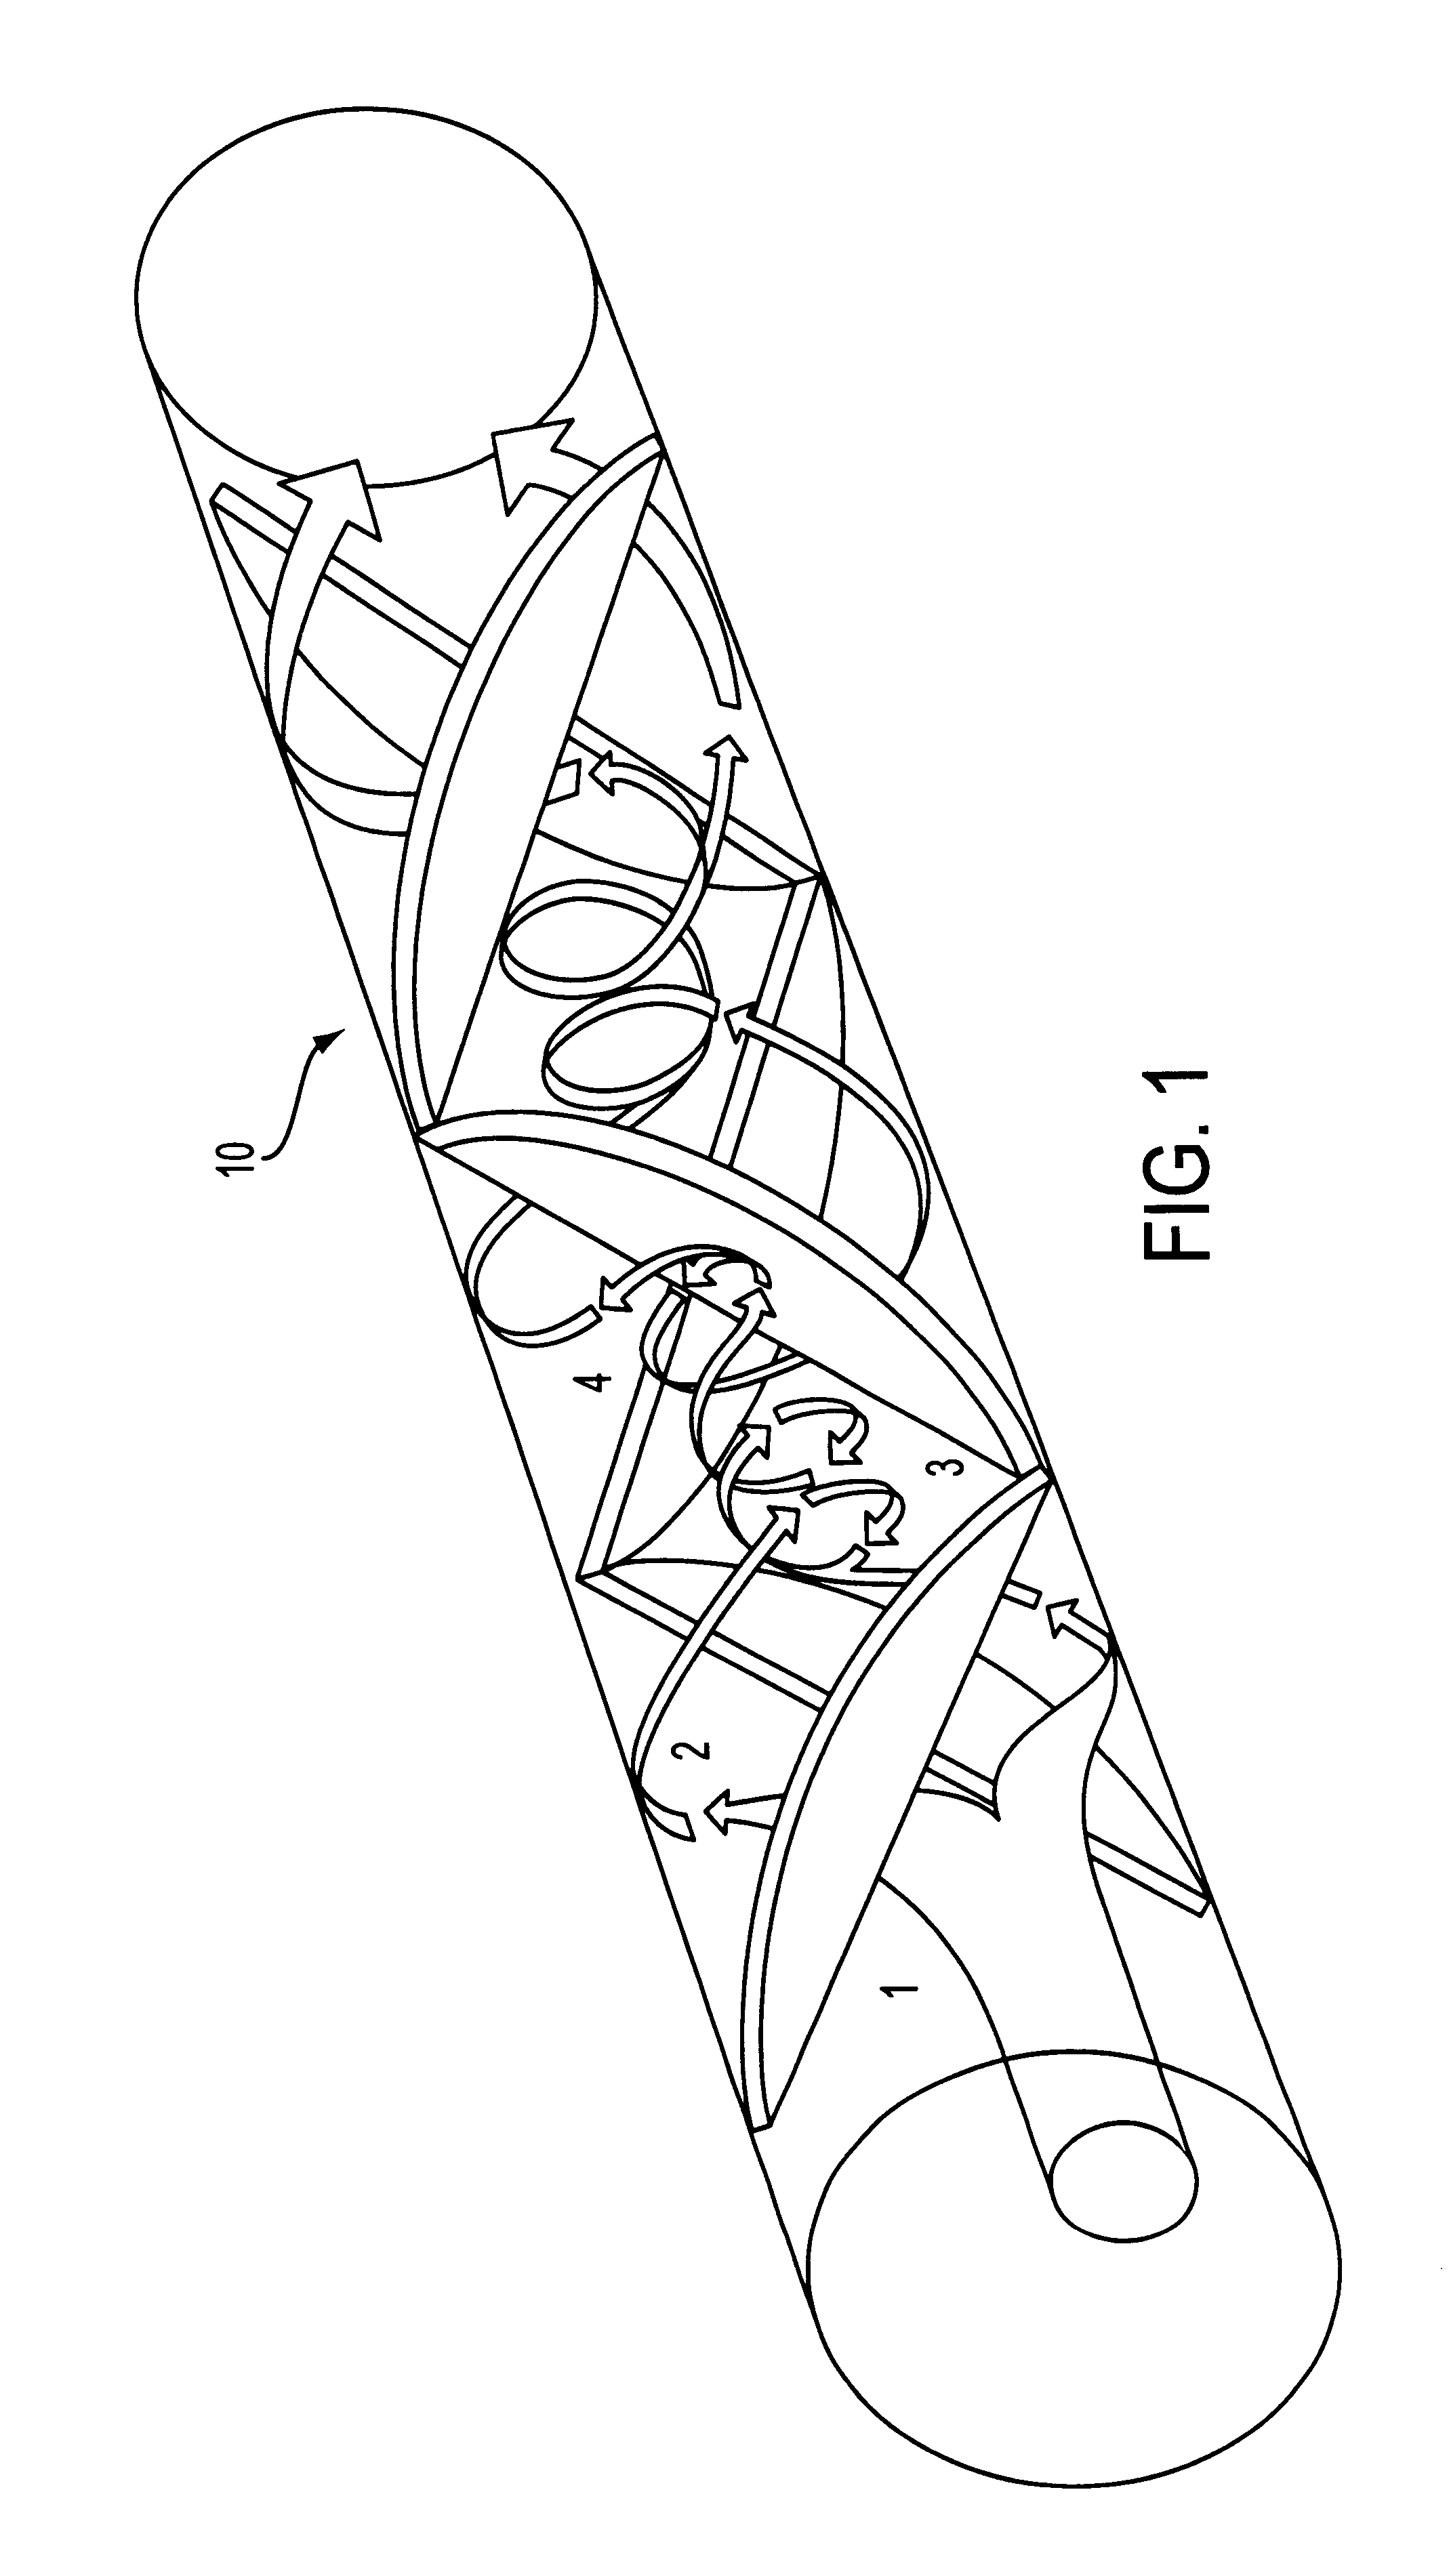 Apparatus and method for preparing microparticles